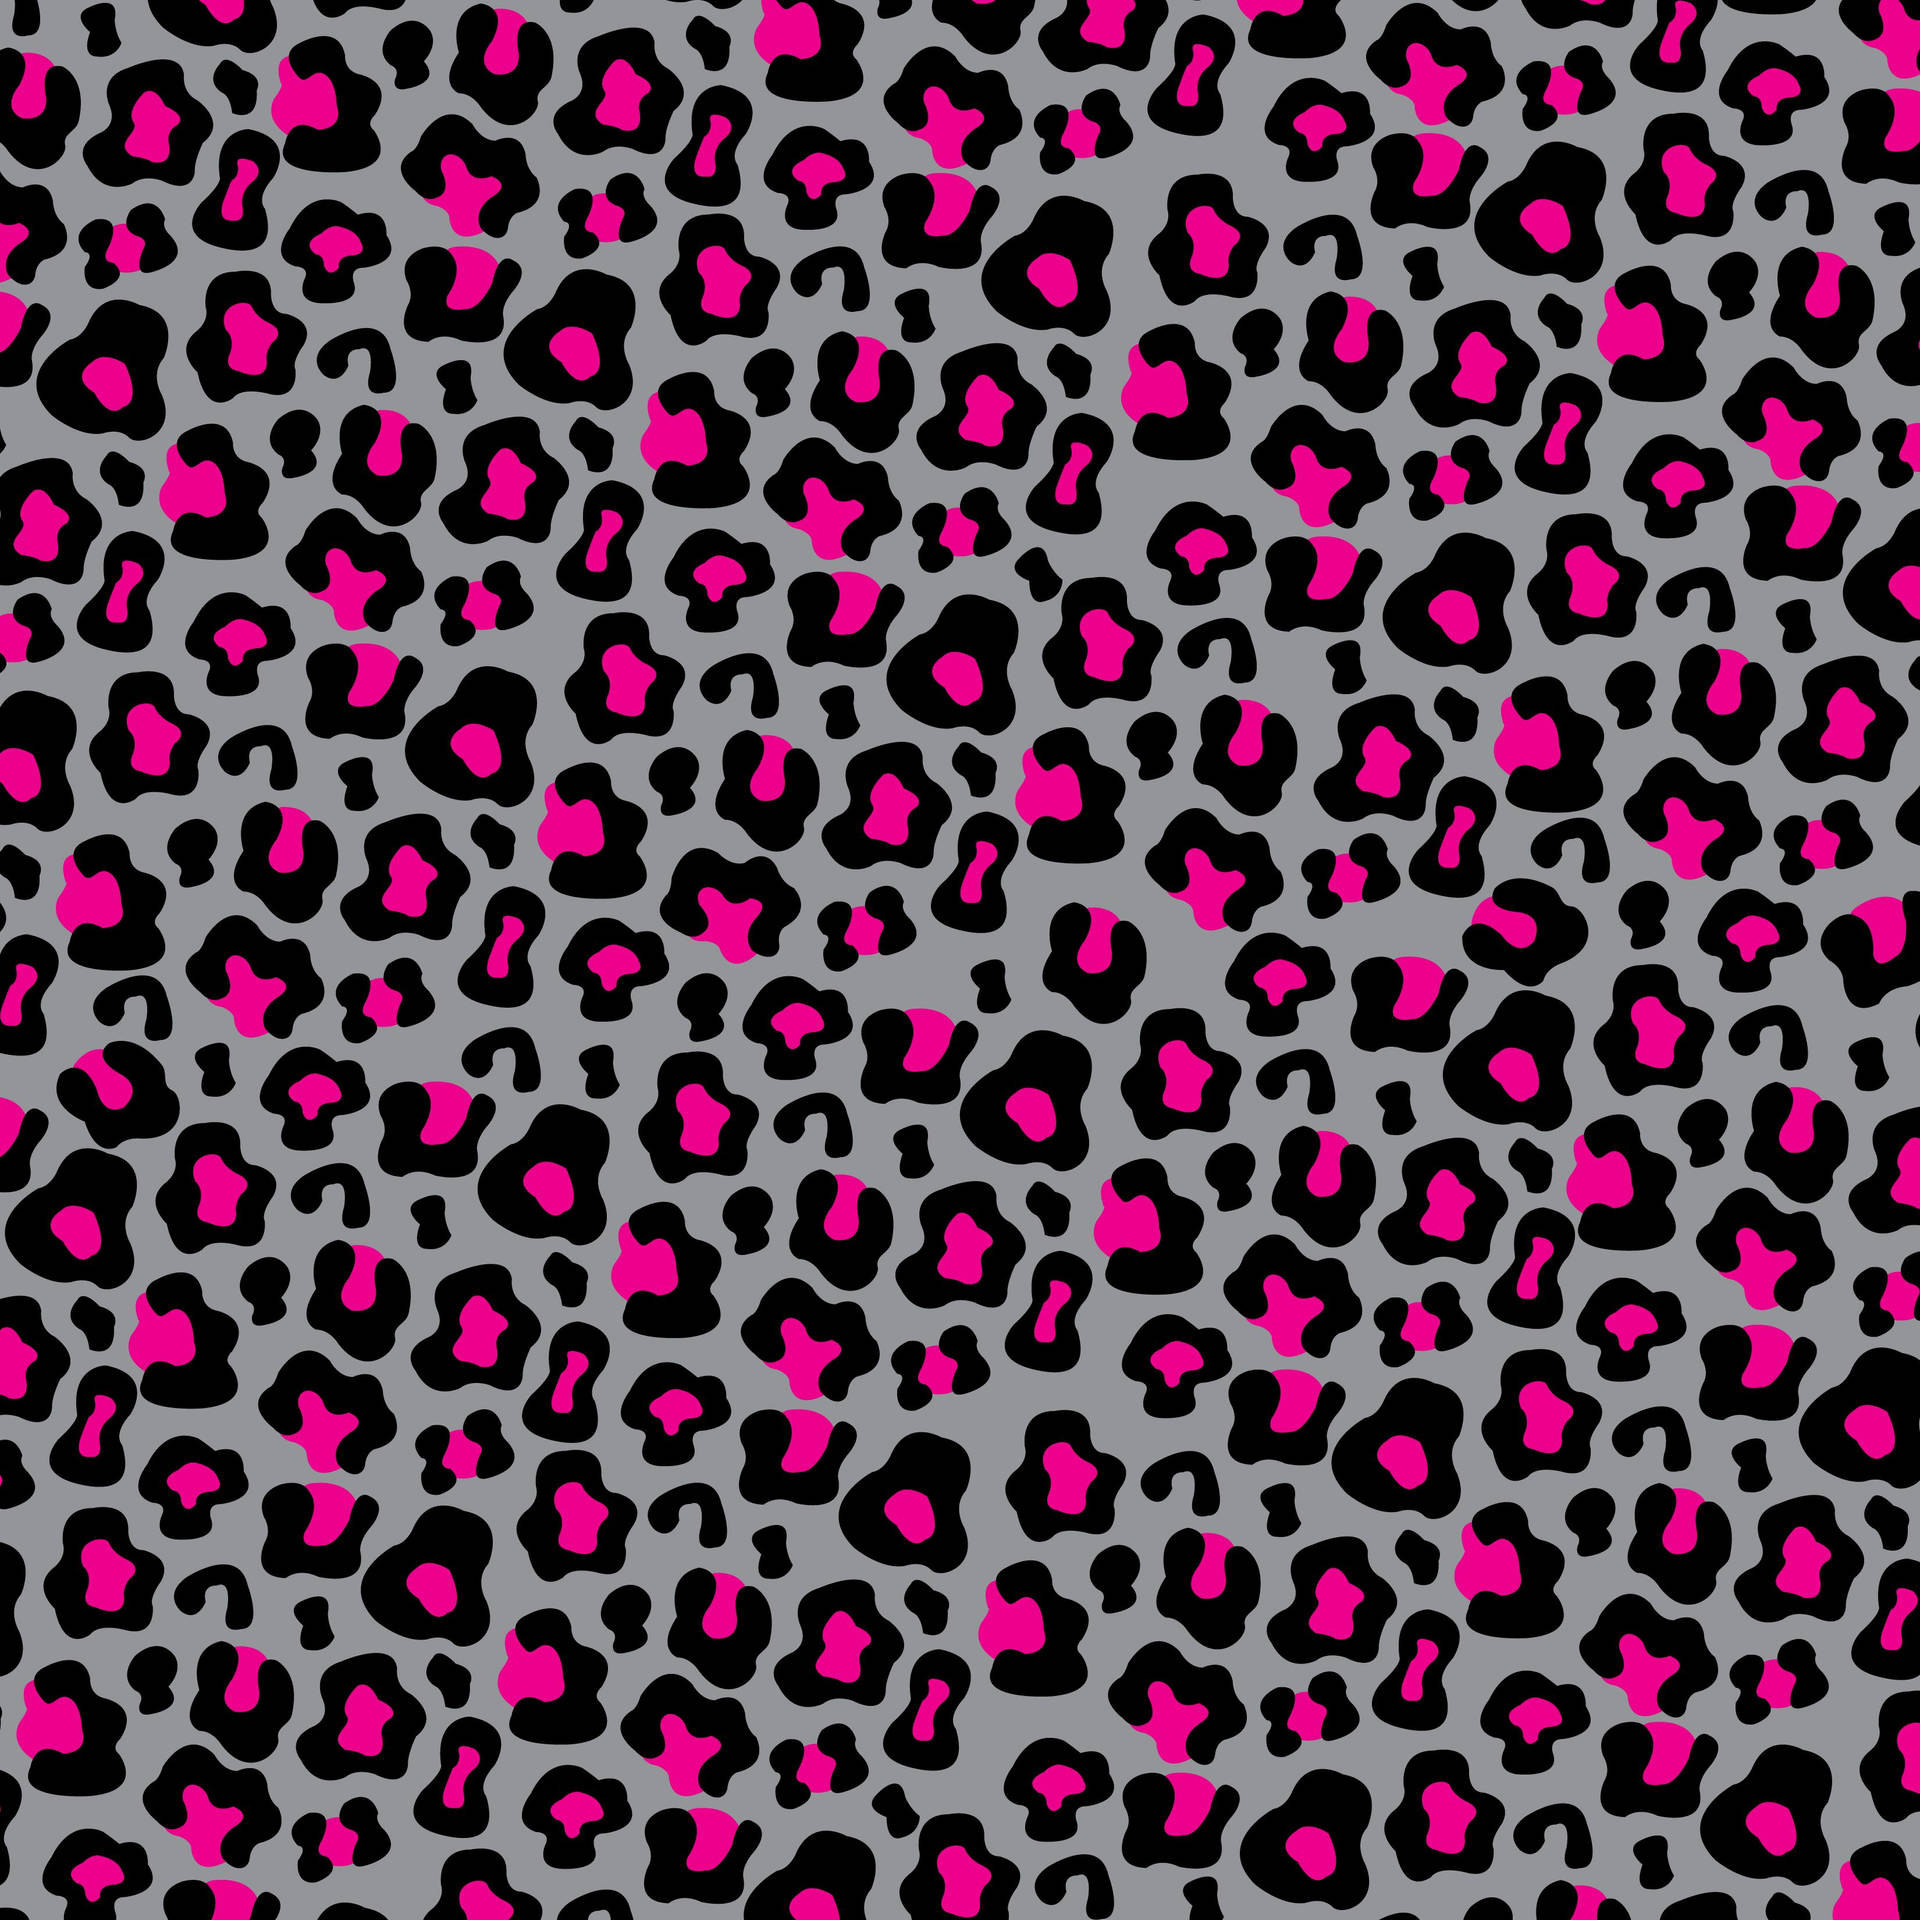 3300X3300 Leopard Print Wallpaper and Background